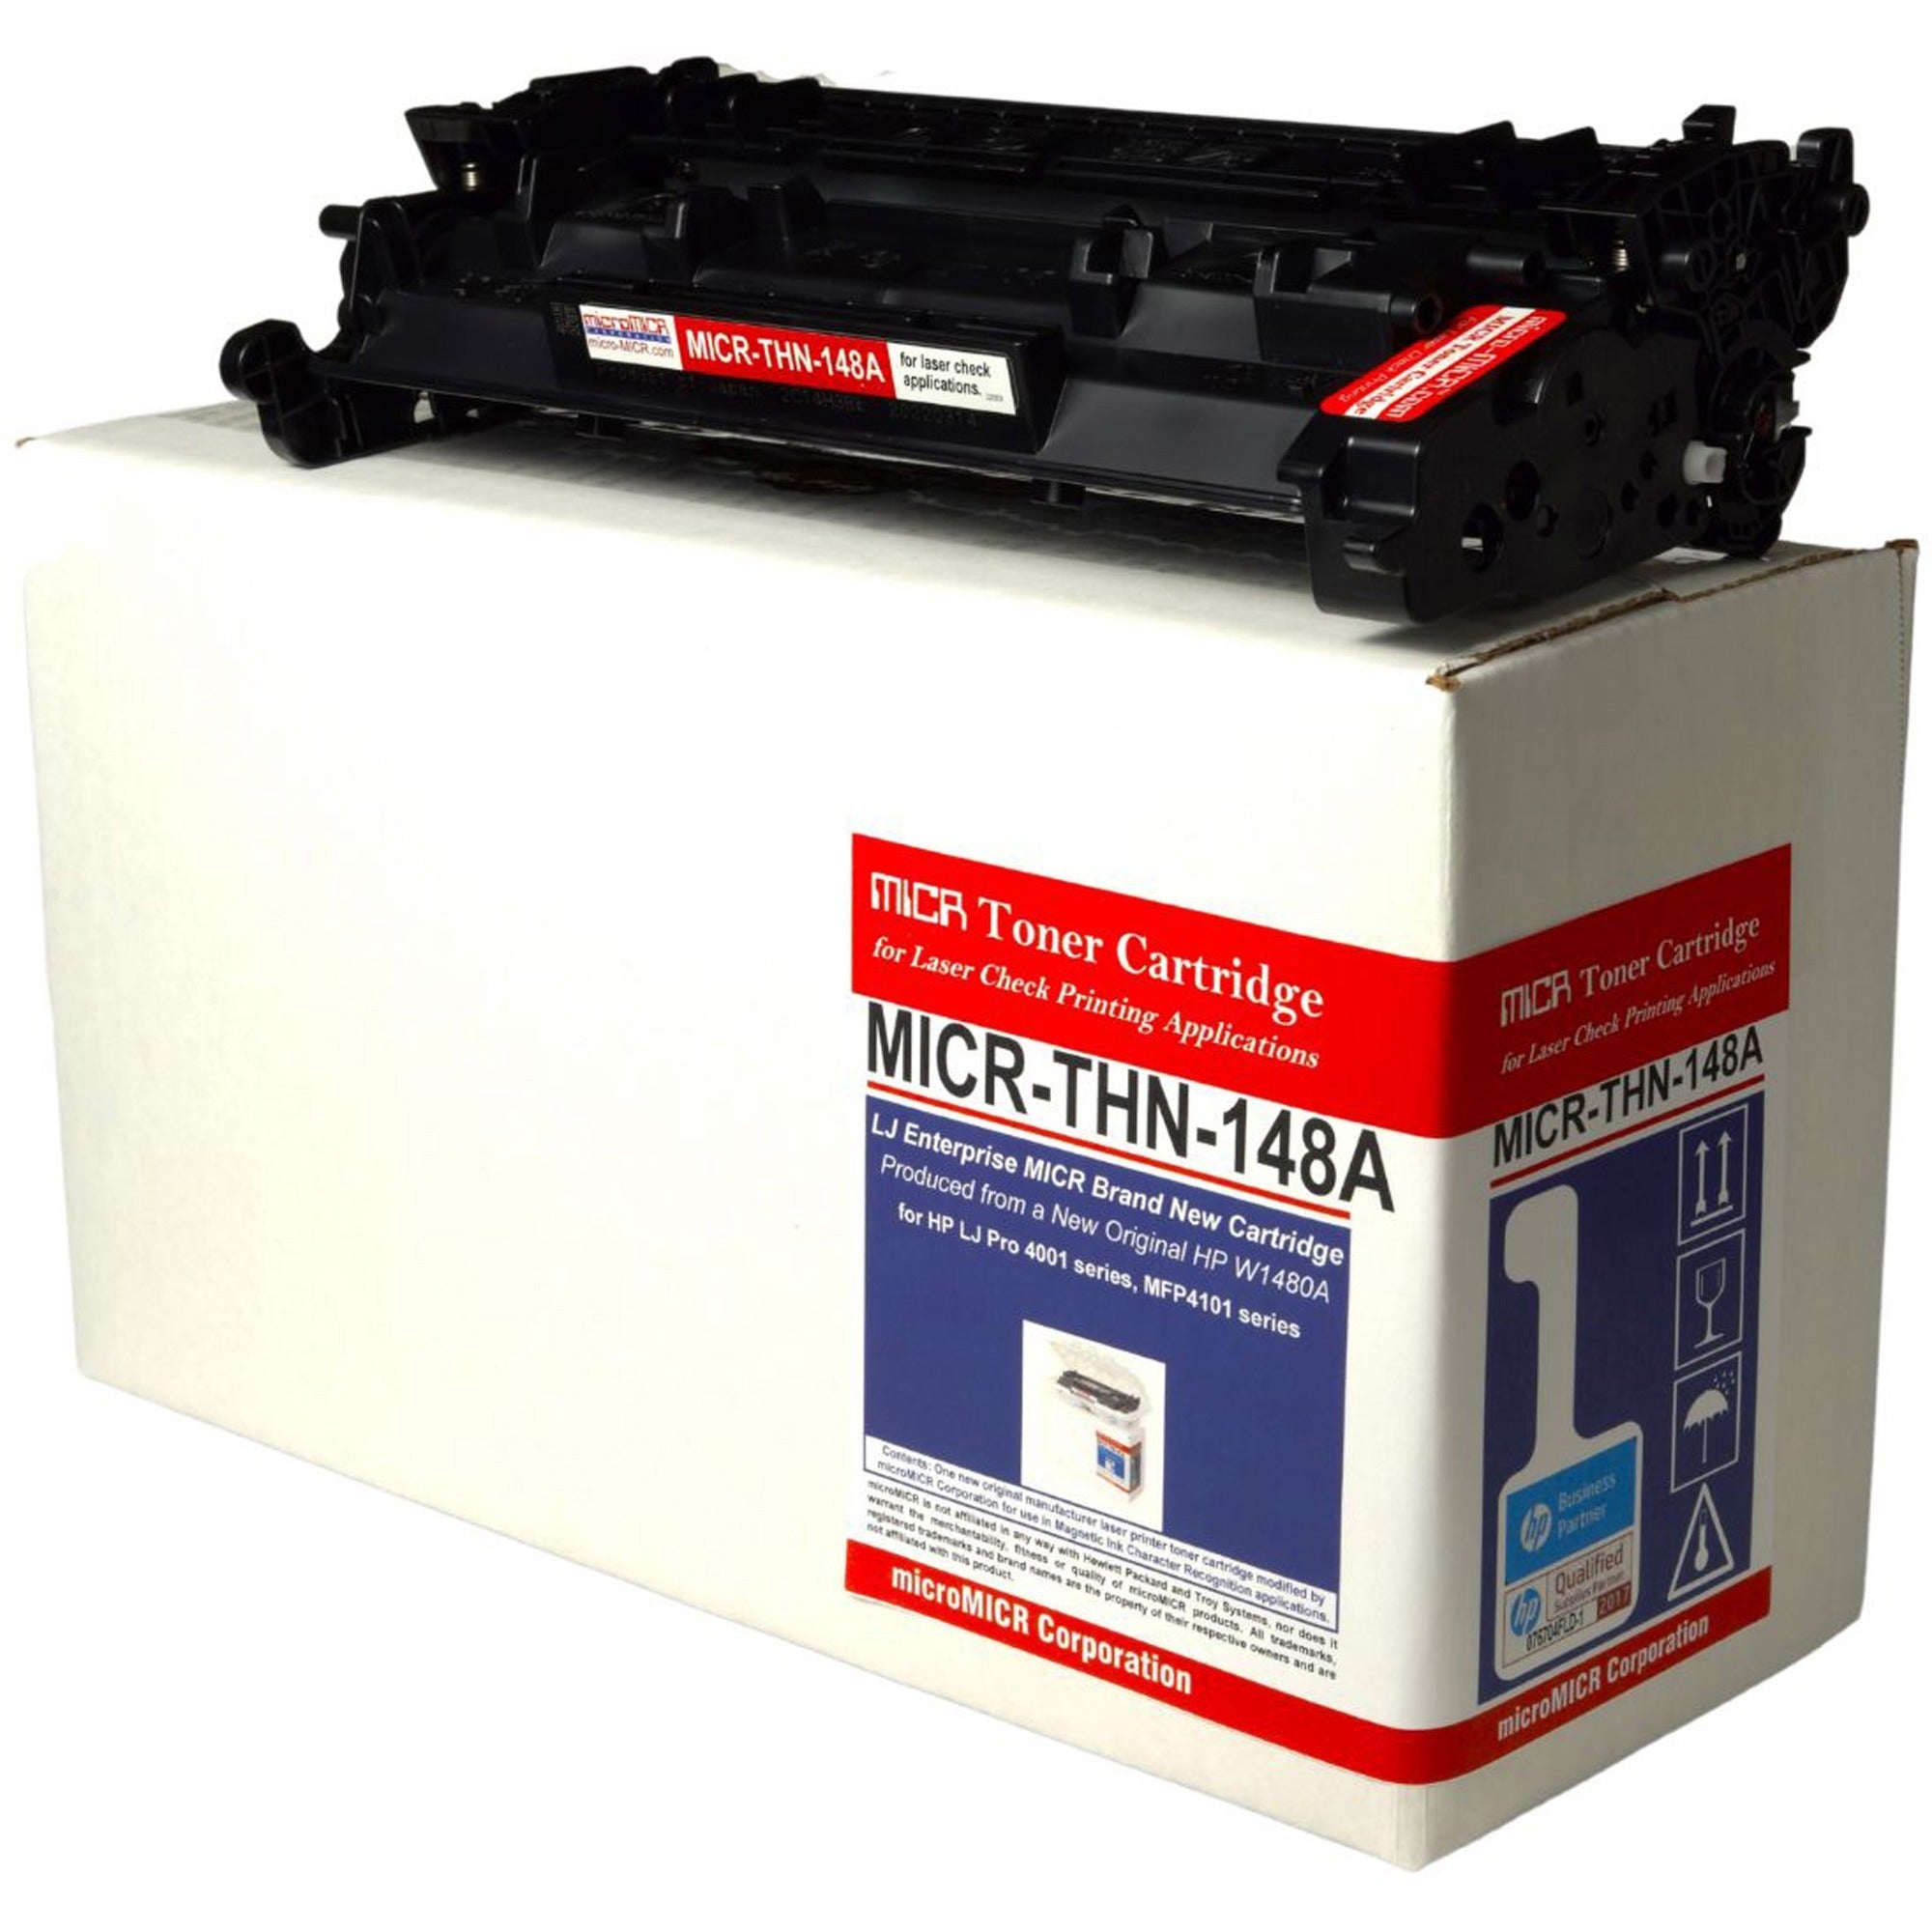 micromicr-micr-standard-yield-laser-toner-cartridge-alternative-for-hp-148a-148x-w1480a-black-1-each-2900-pages_mcmmicrthn148a - 1